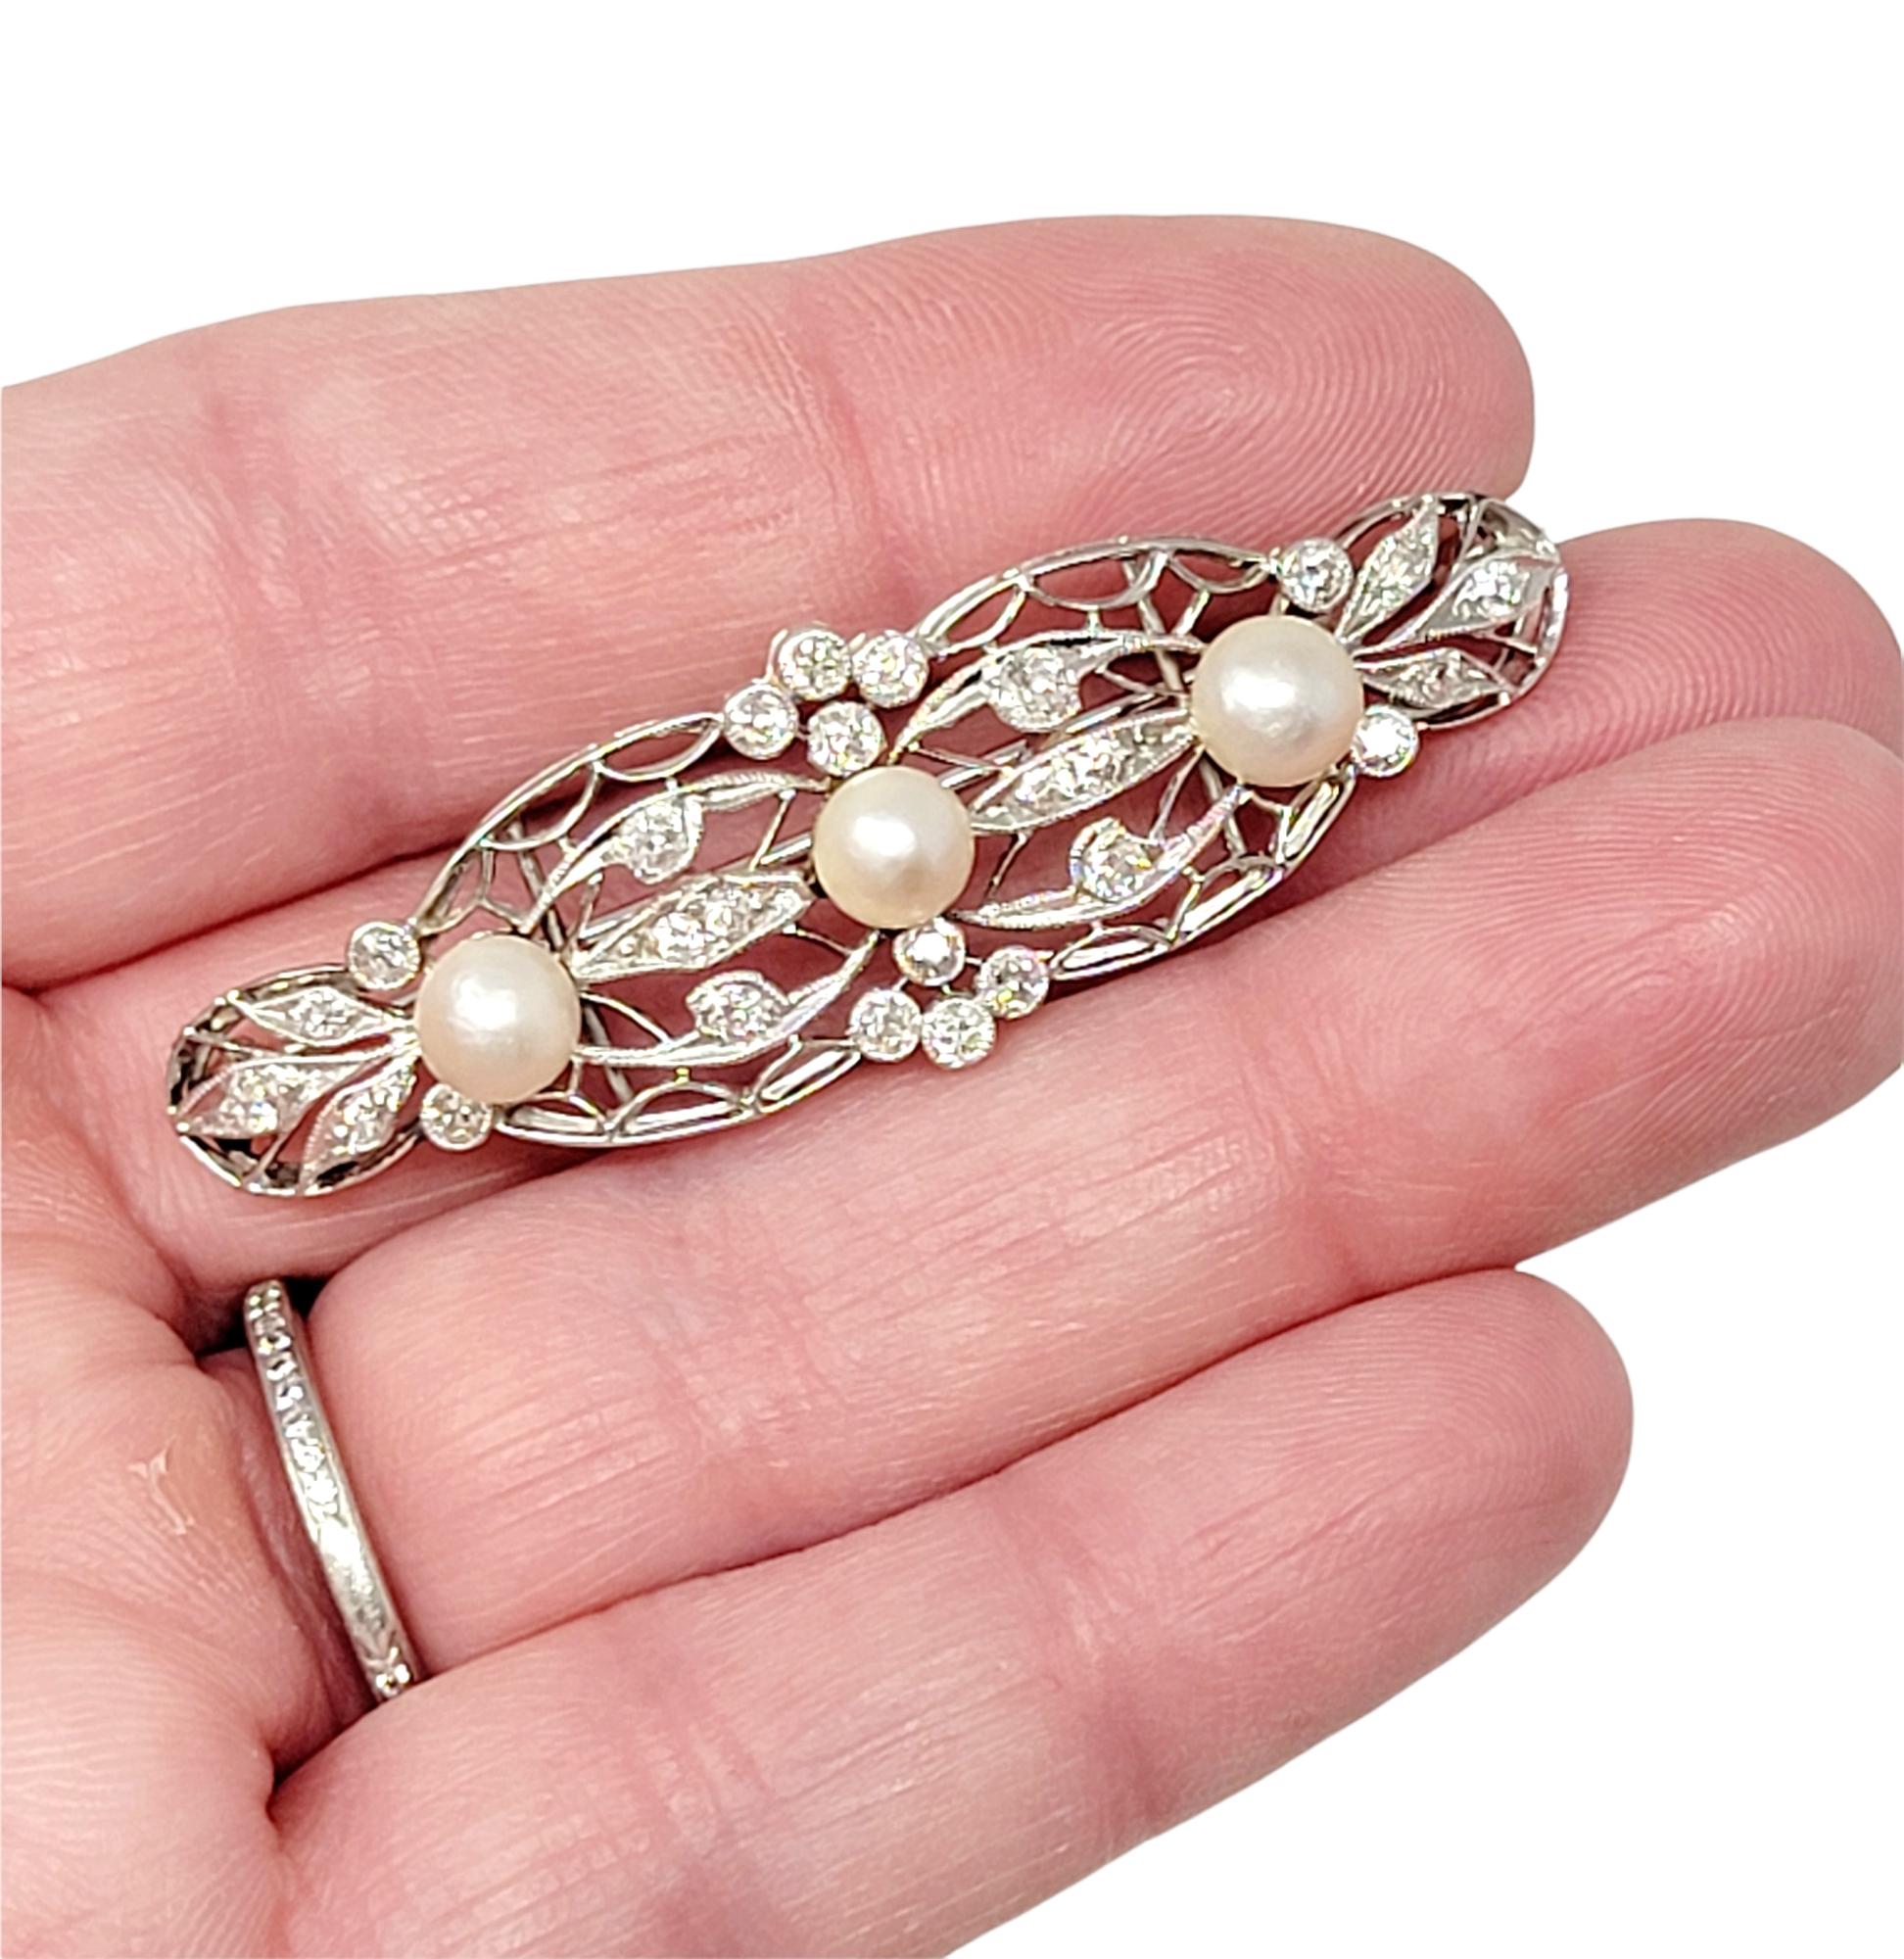 Vintage Edwardian Style Diamond and Pearl Filigree Brooch 14 Karat White Gold For Sale 3